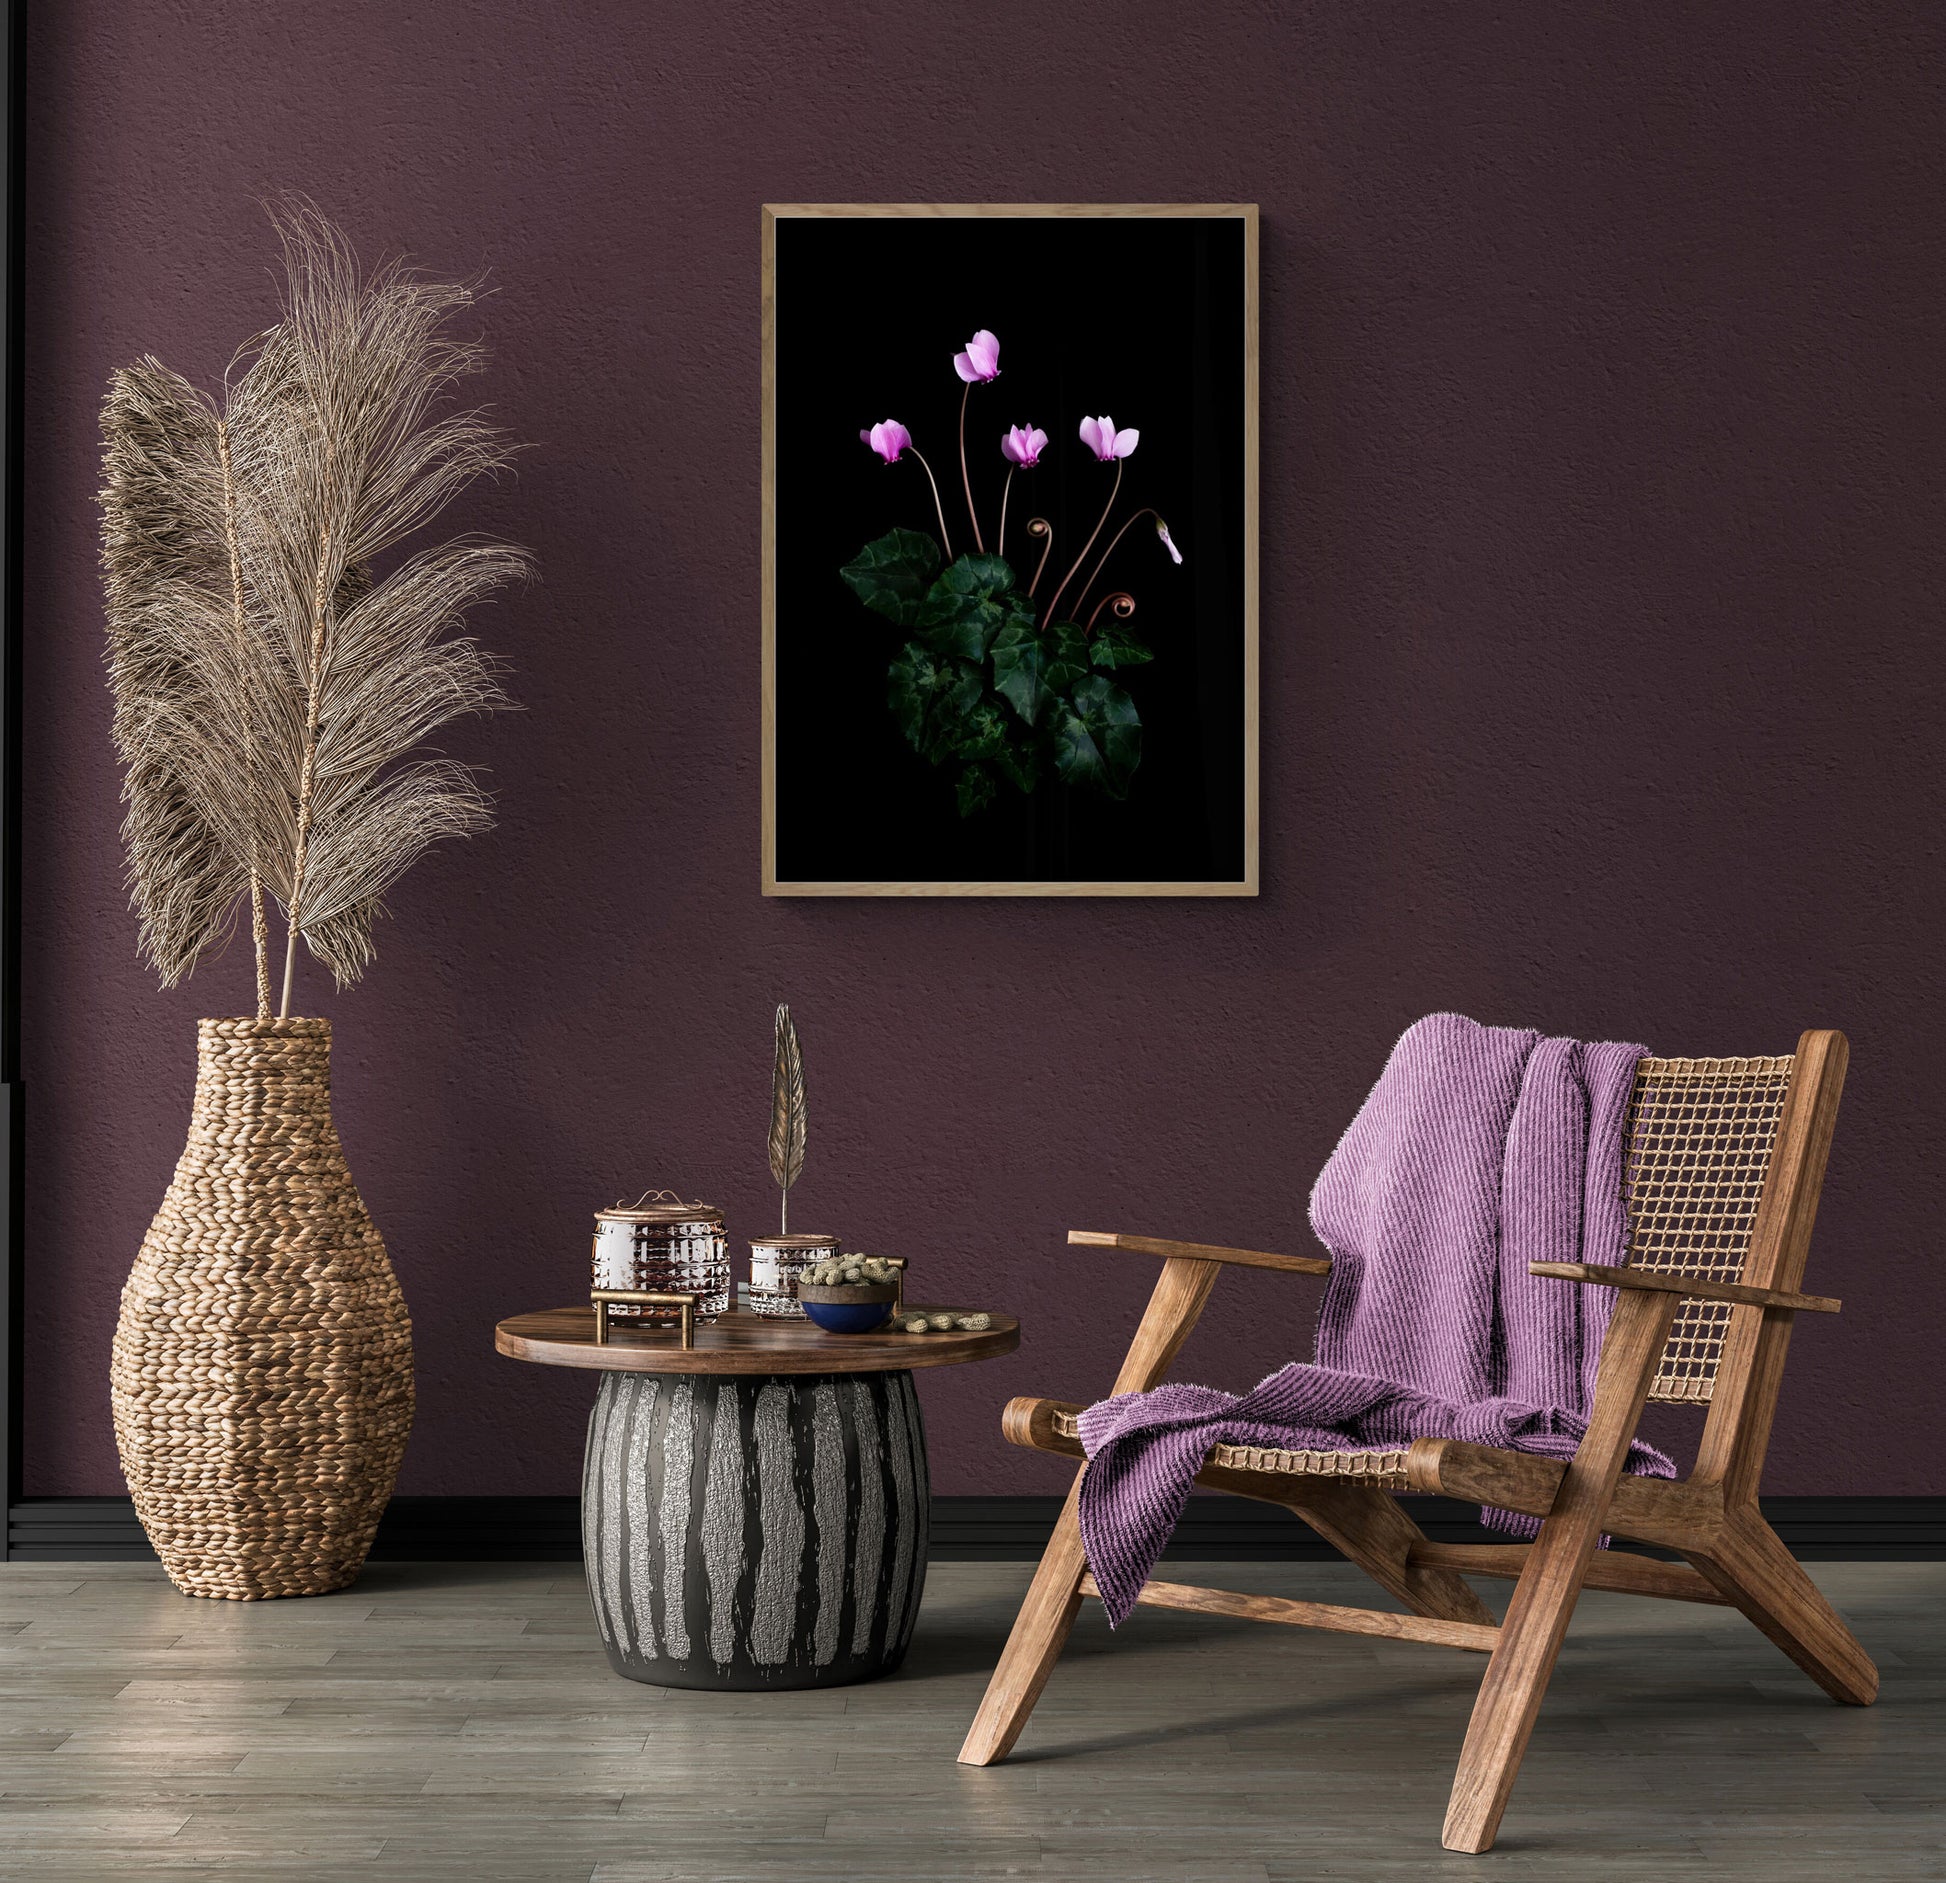 A botanical prrint of an intimate study of the autumn flowering Cyclamen hederifolium, featuring it's dainty pink flowers and marbled foliage, photographed on a black background on a plum cpoloured wall.